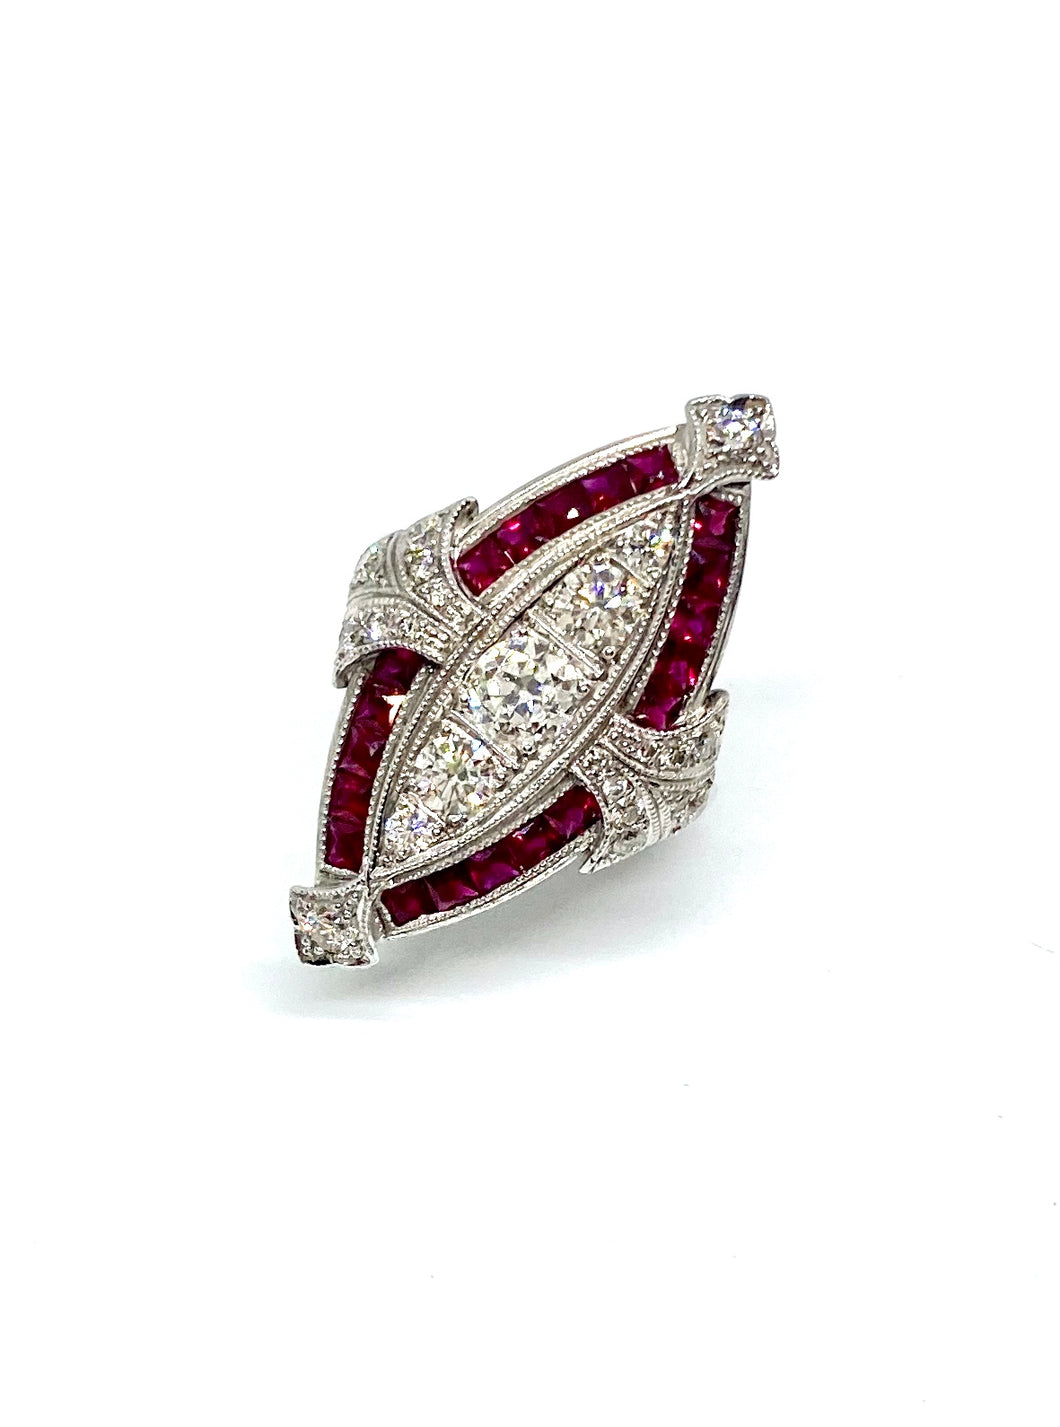 R1315 18kt WG Ruby and Diamond Deco Style Ring